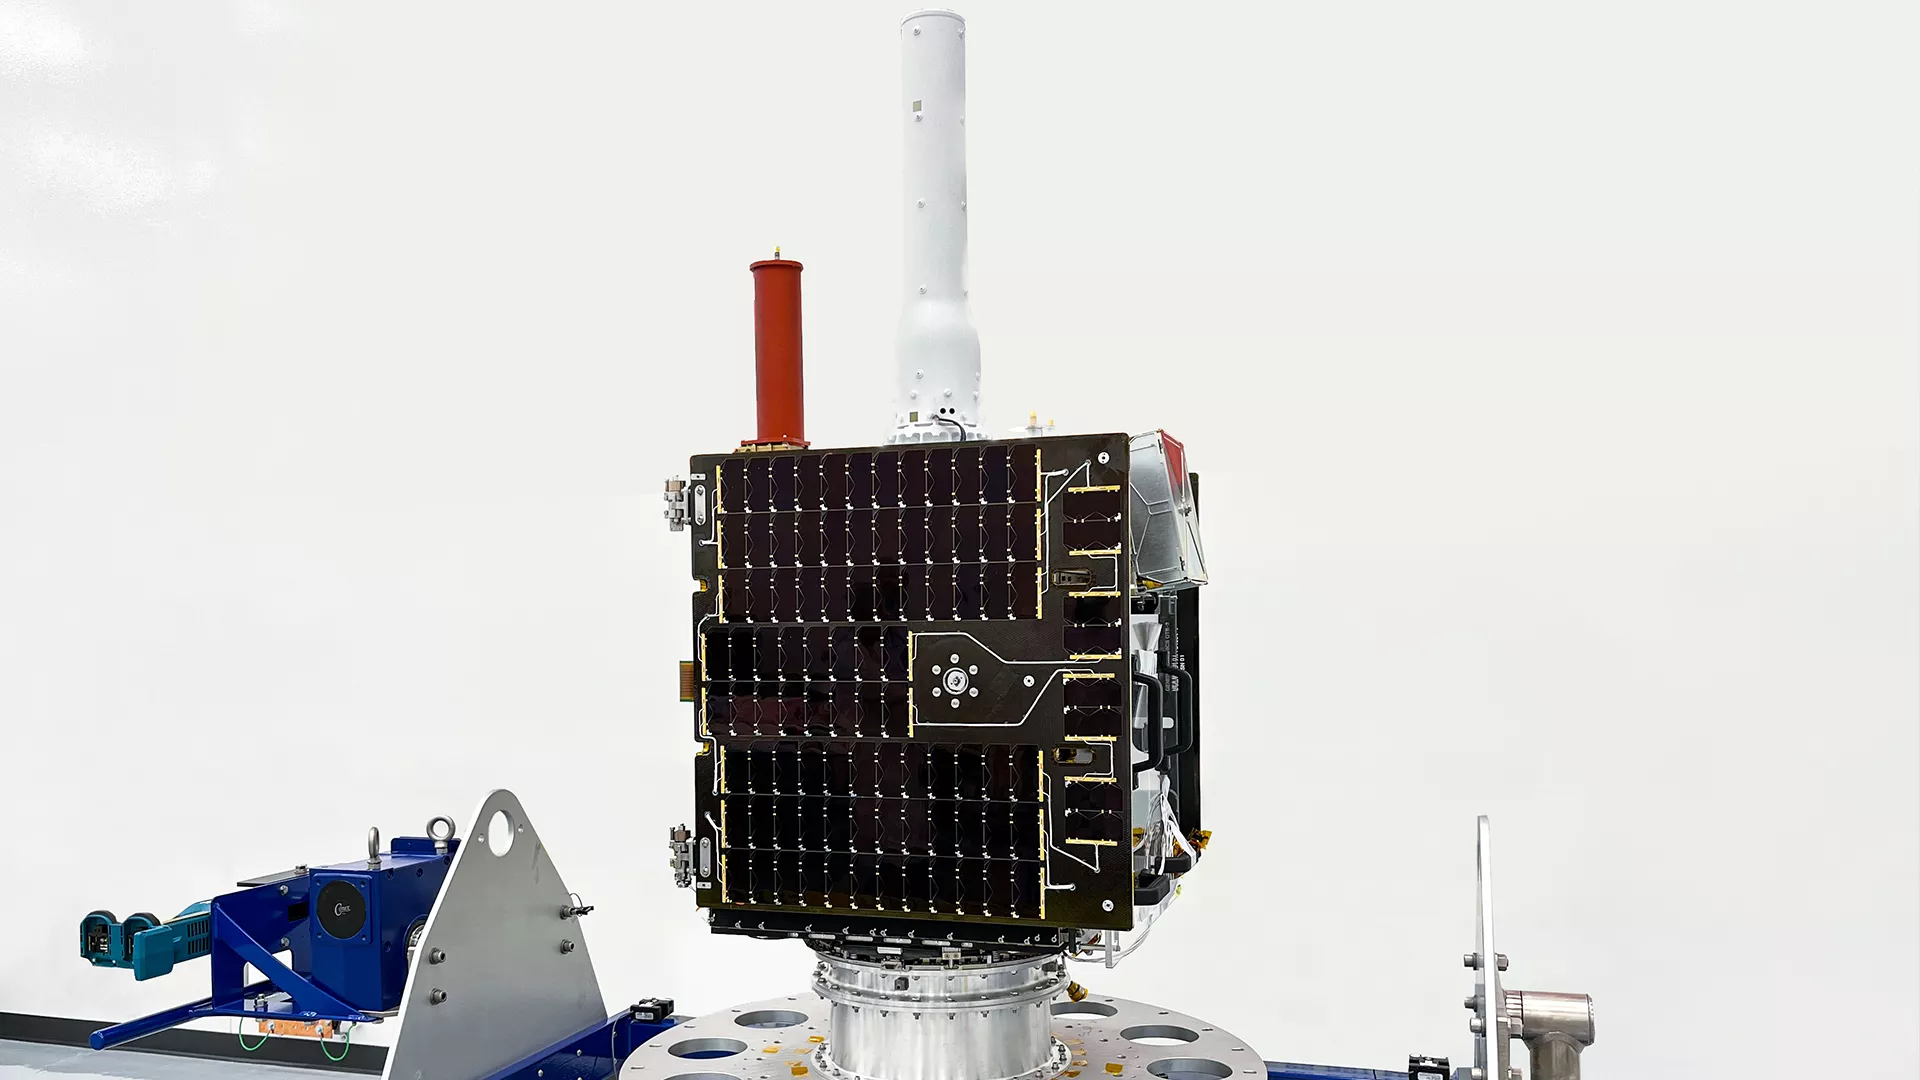 Image of the ARGOS-4 Instrument on a satellite